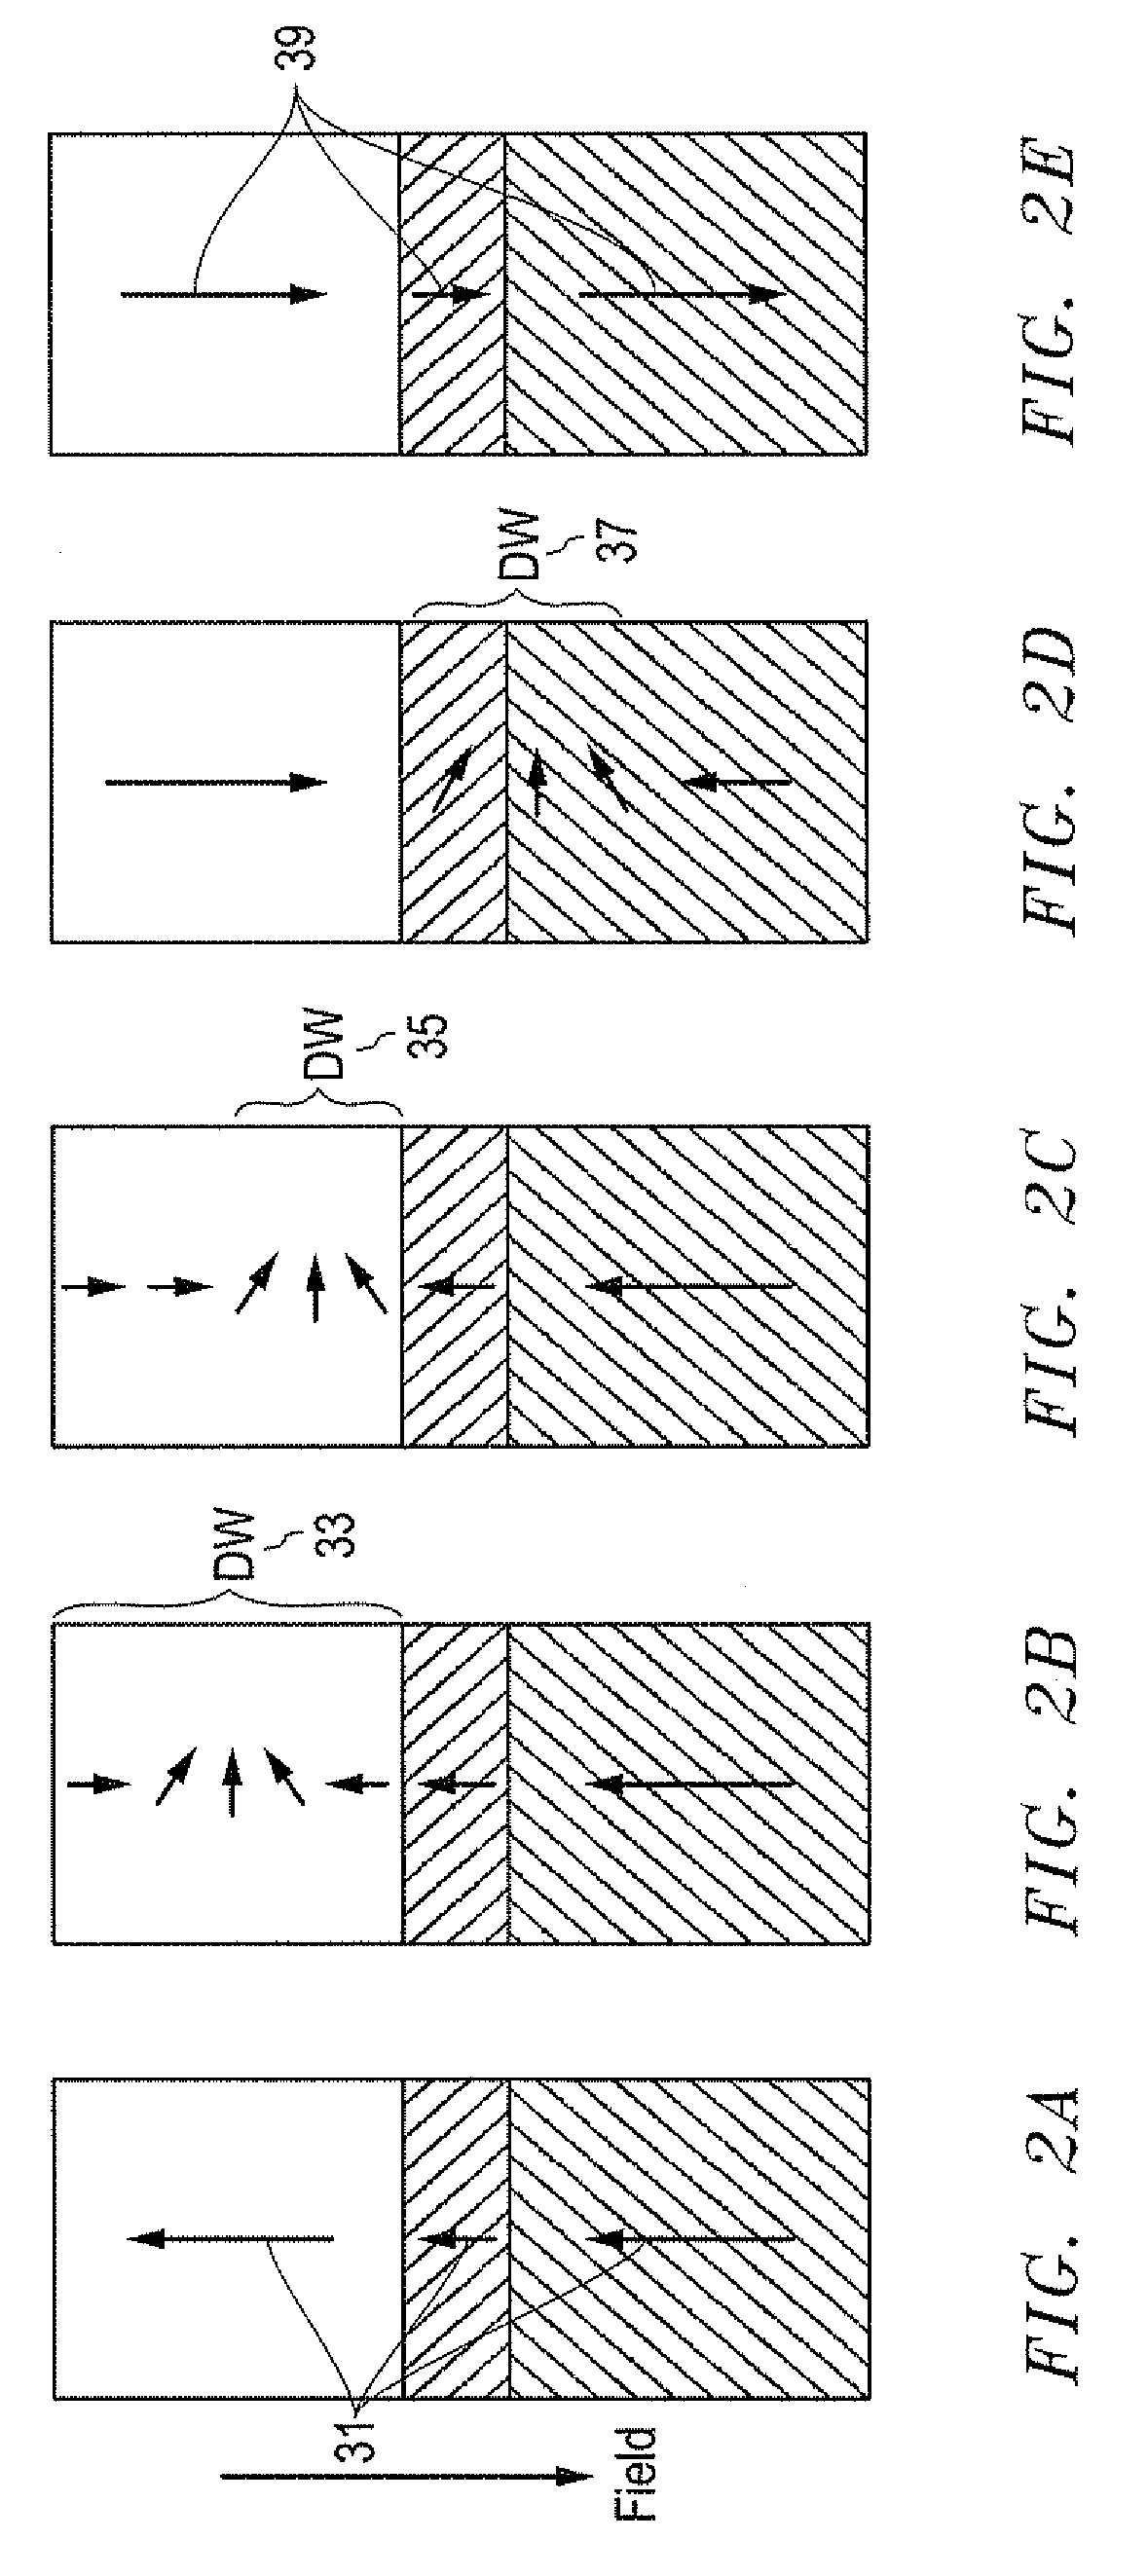 System, method and apparatus for multiple anisotropy layered magnetic structures for controlling reversal mechanism and tightening of switching field distribution in bit patterned media